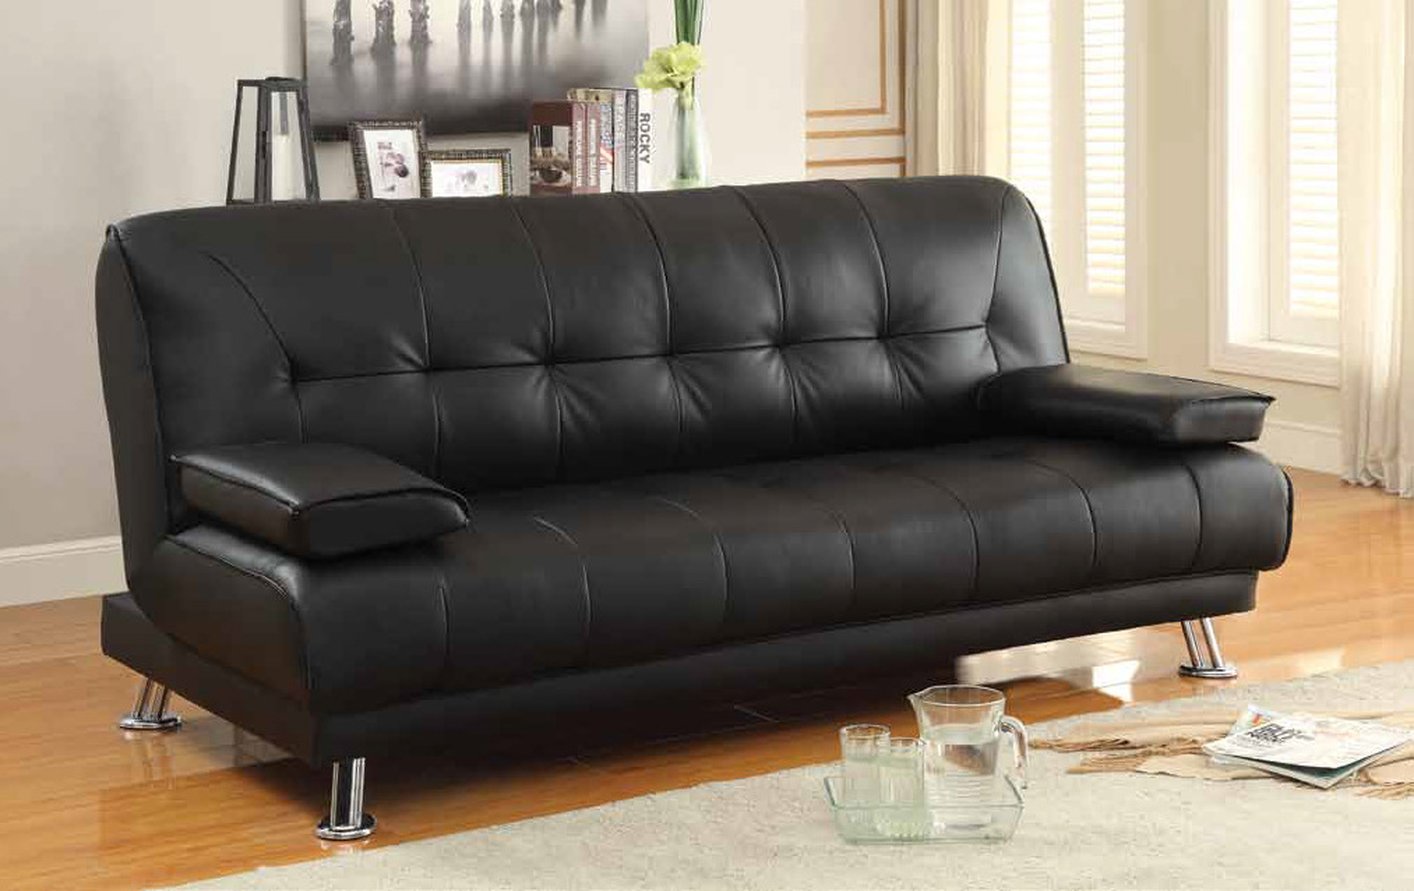 Cozy Black Leather Sofa Bed black leather sofa bed